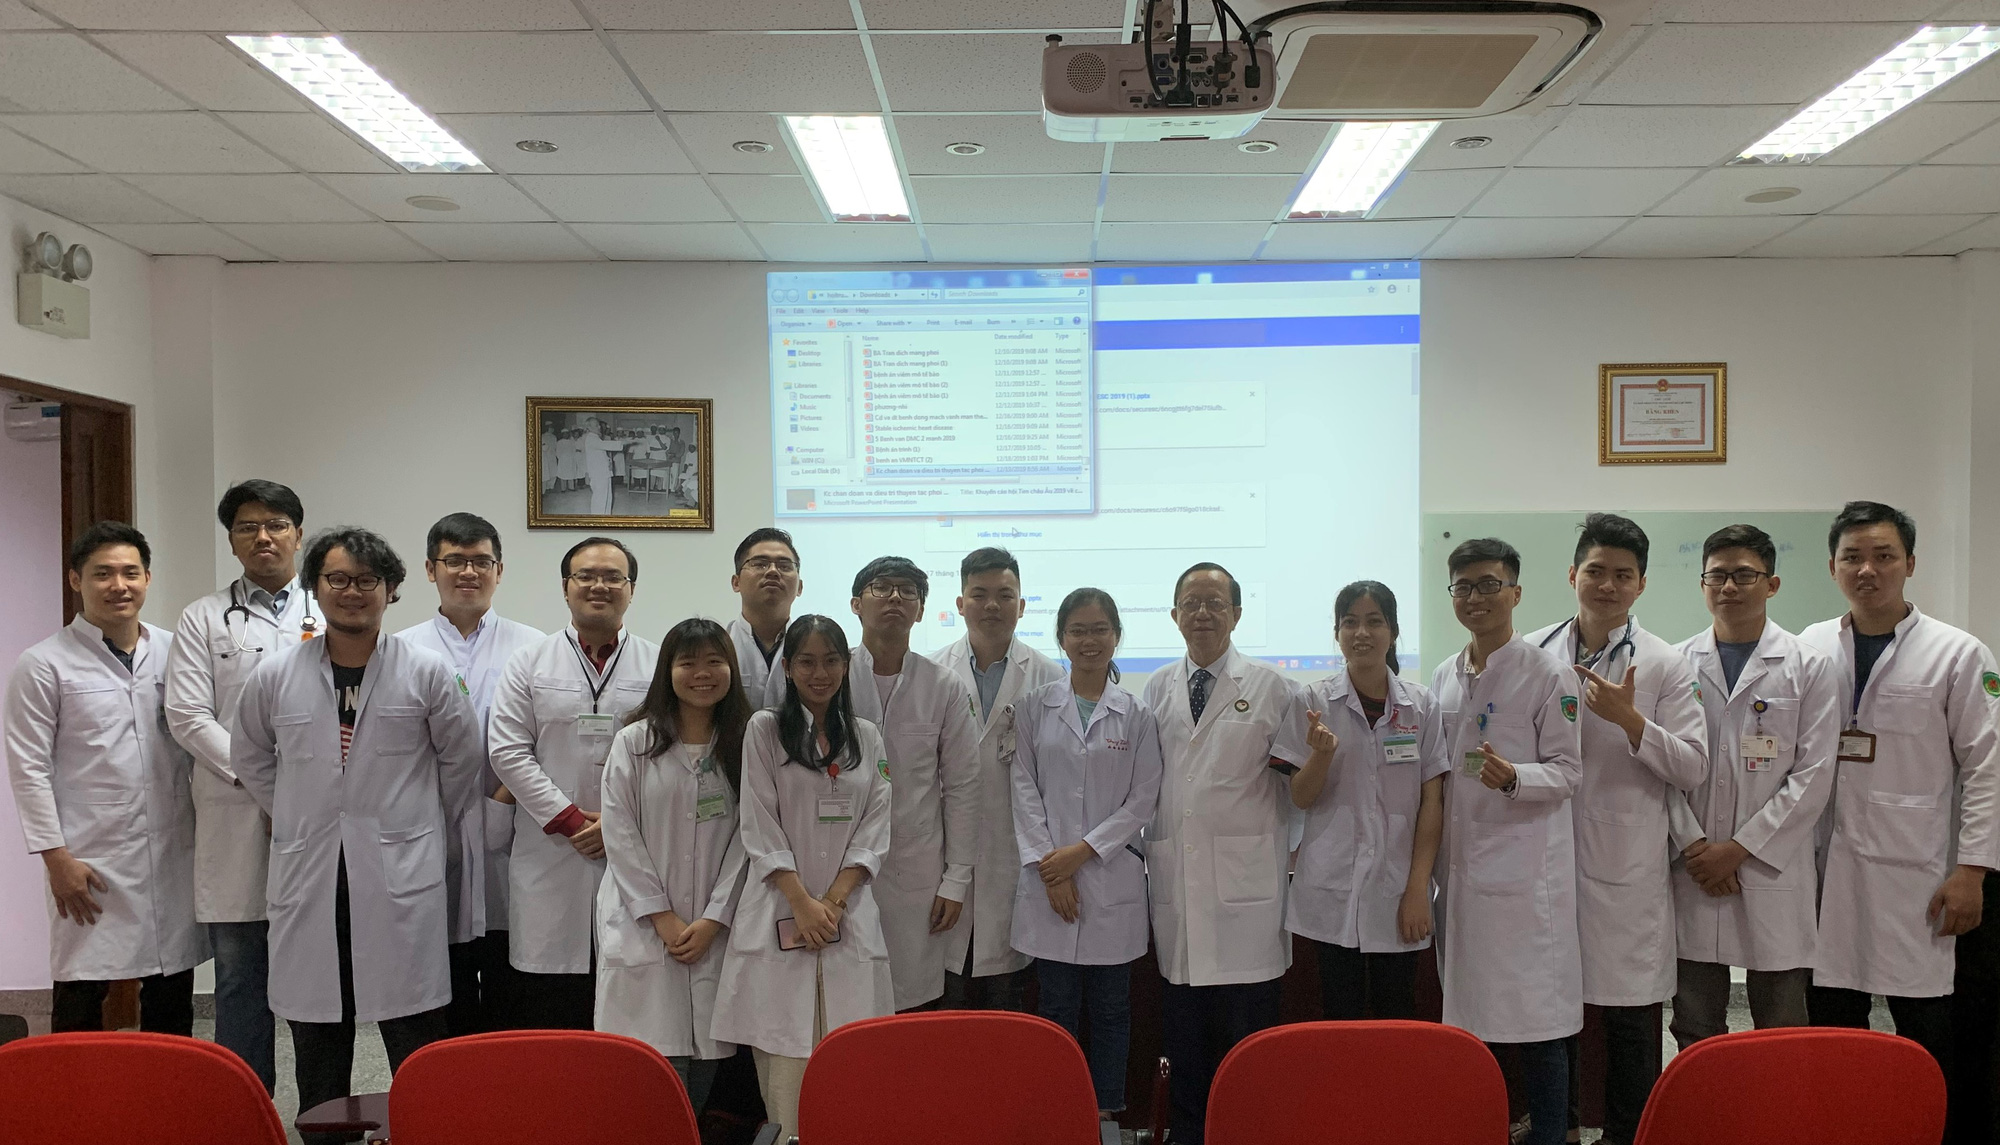 Students at the School of Medicine of Tan Tao University pose for a photo inside their classroom. Photo: Tan Tao University